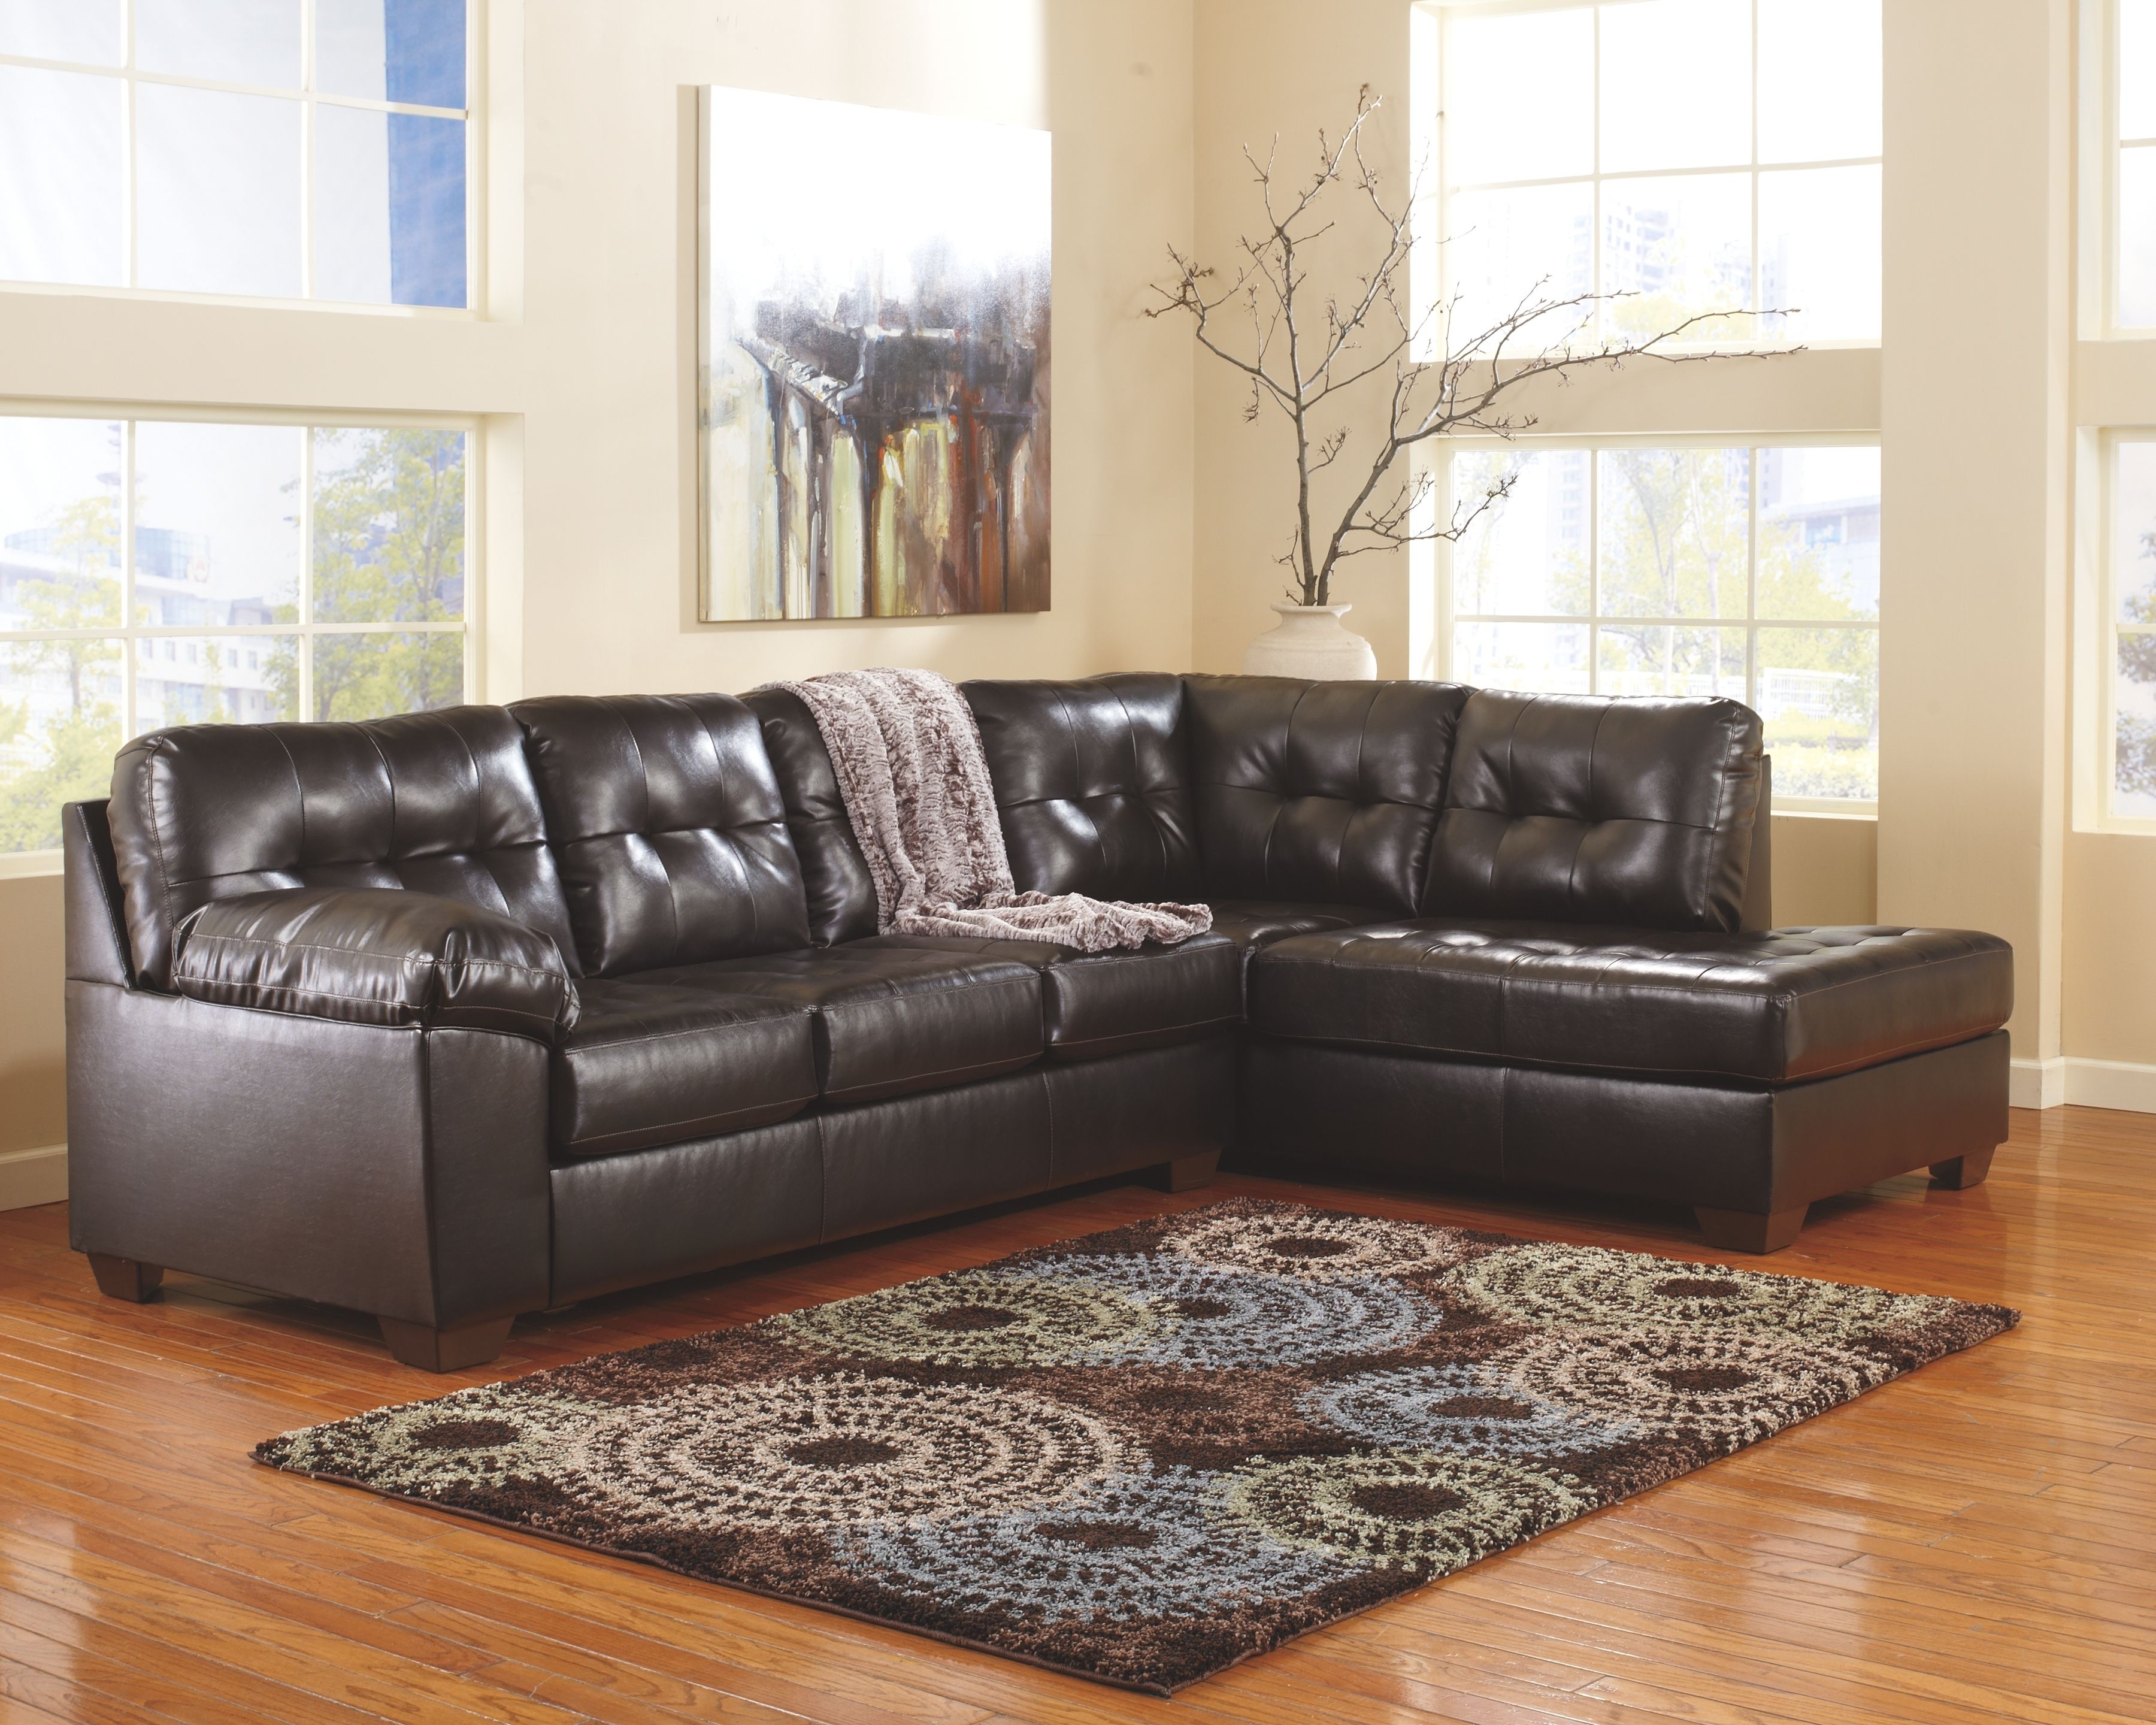 Alliston 2 Piece Sectional, Chocolate | Products | Pinterest | Products Intended For Marissa Ii 3 Piece Sectionals (Photo 11 of 30)